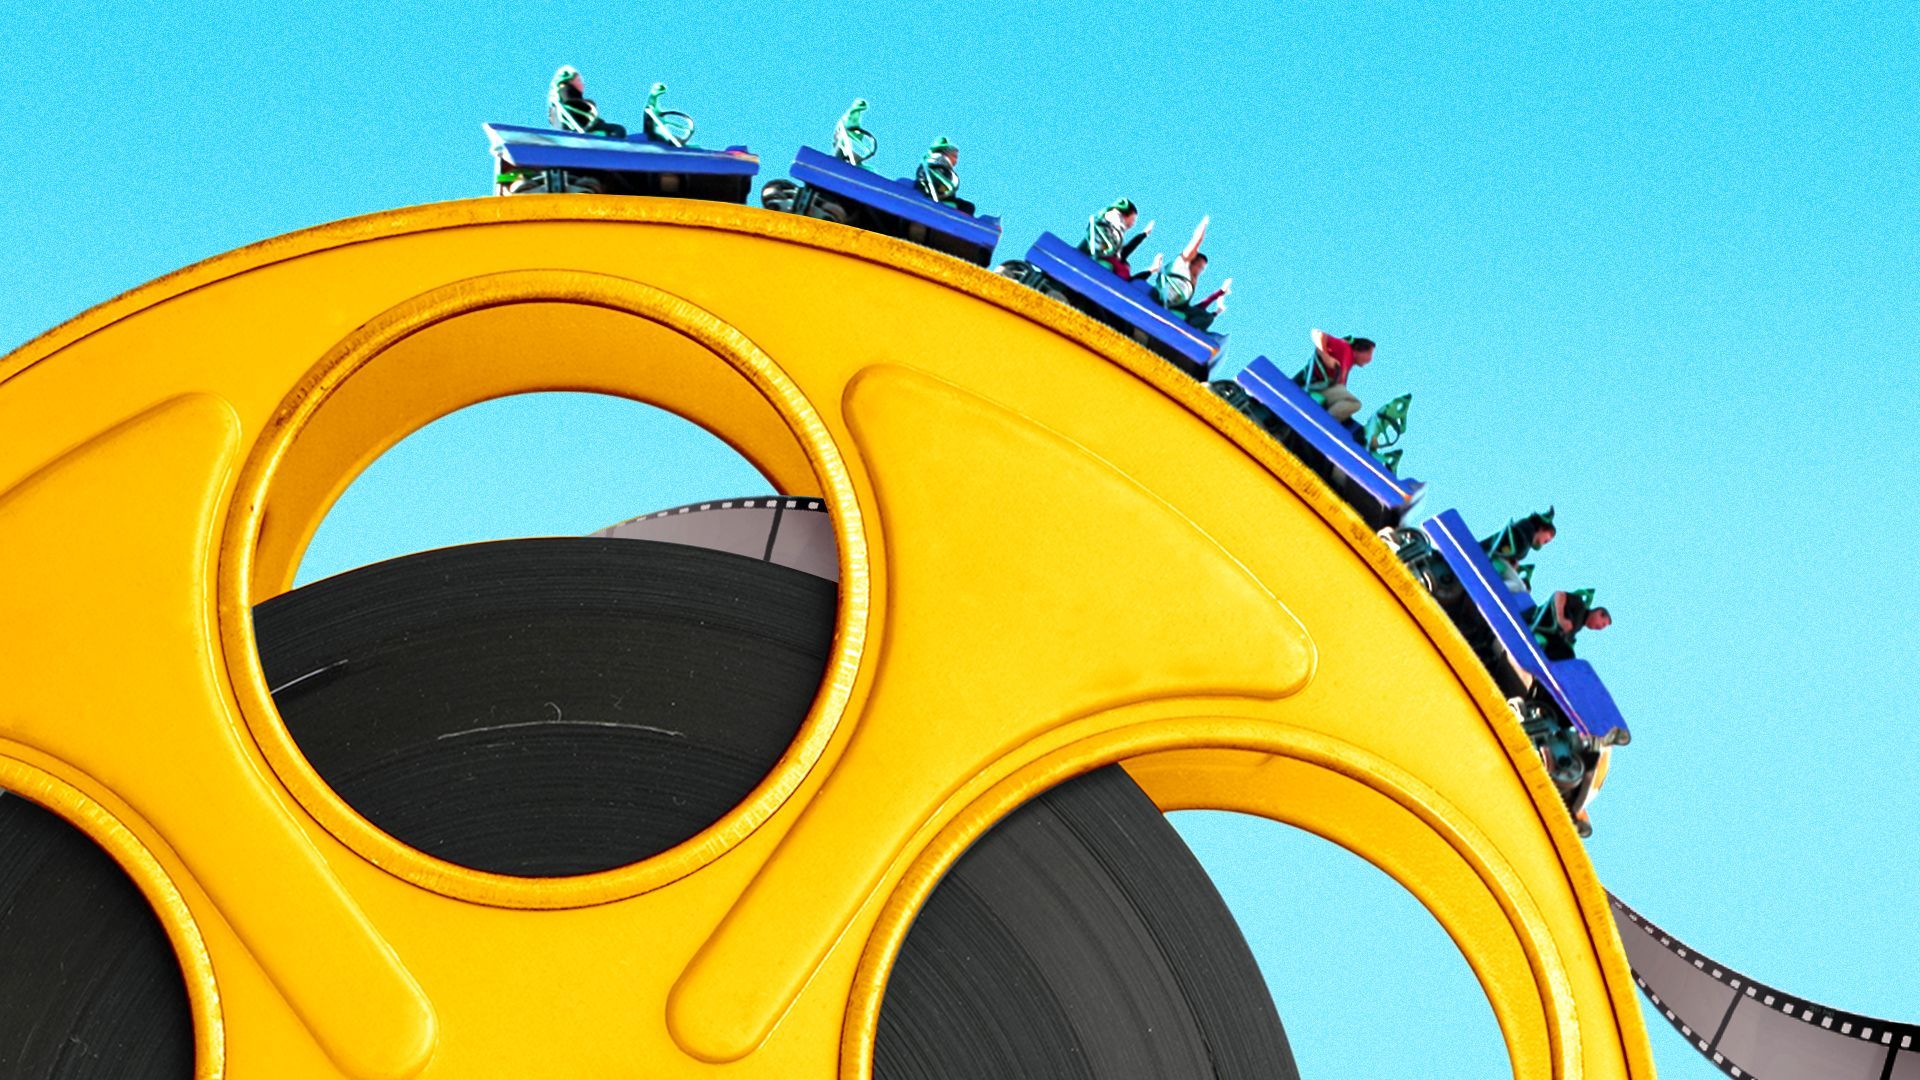 Illustration of a roller coaster car atop a peak made from a large film reel.